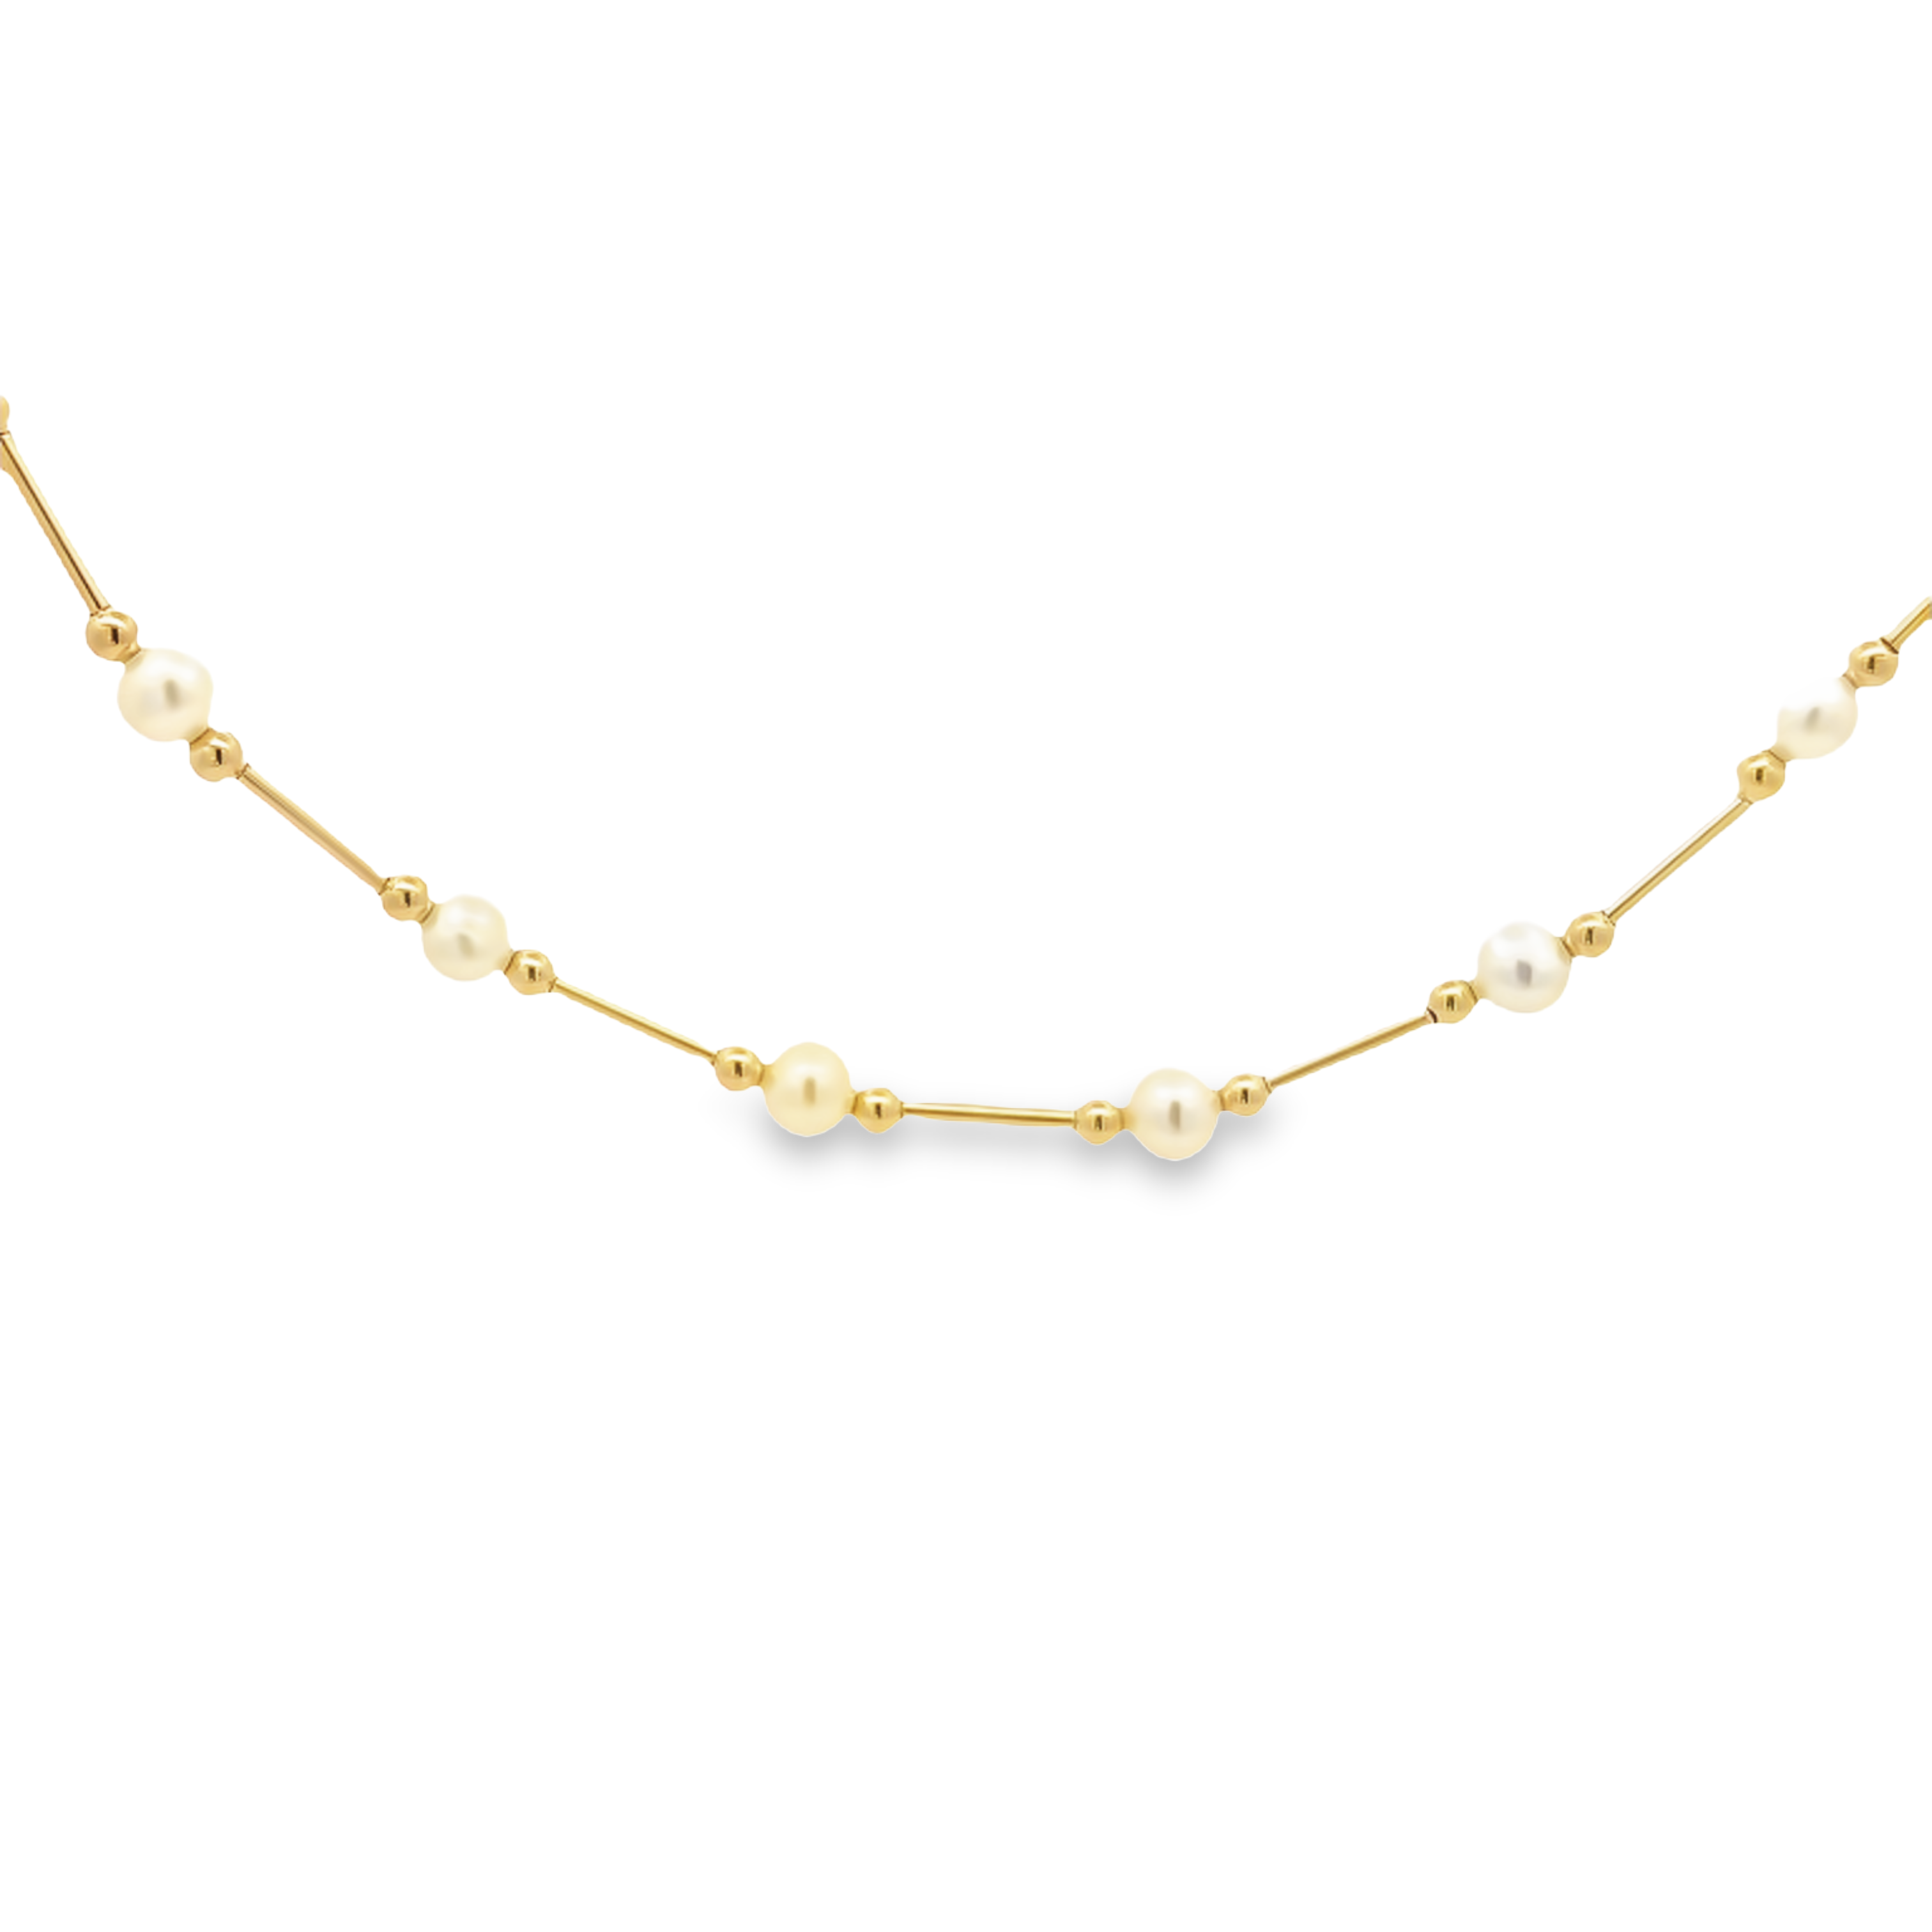 14 Karat yellow gold pearl necklace with 23=5.00-6.00Mm Fresh Water Pearls. 17"